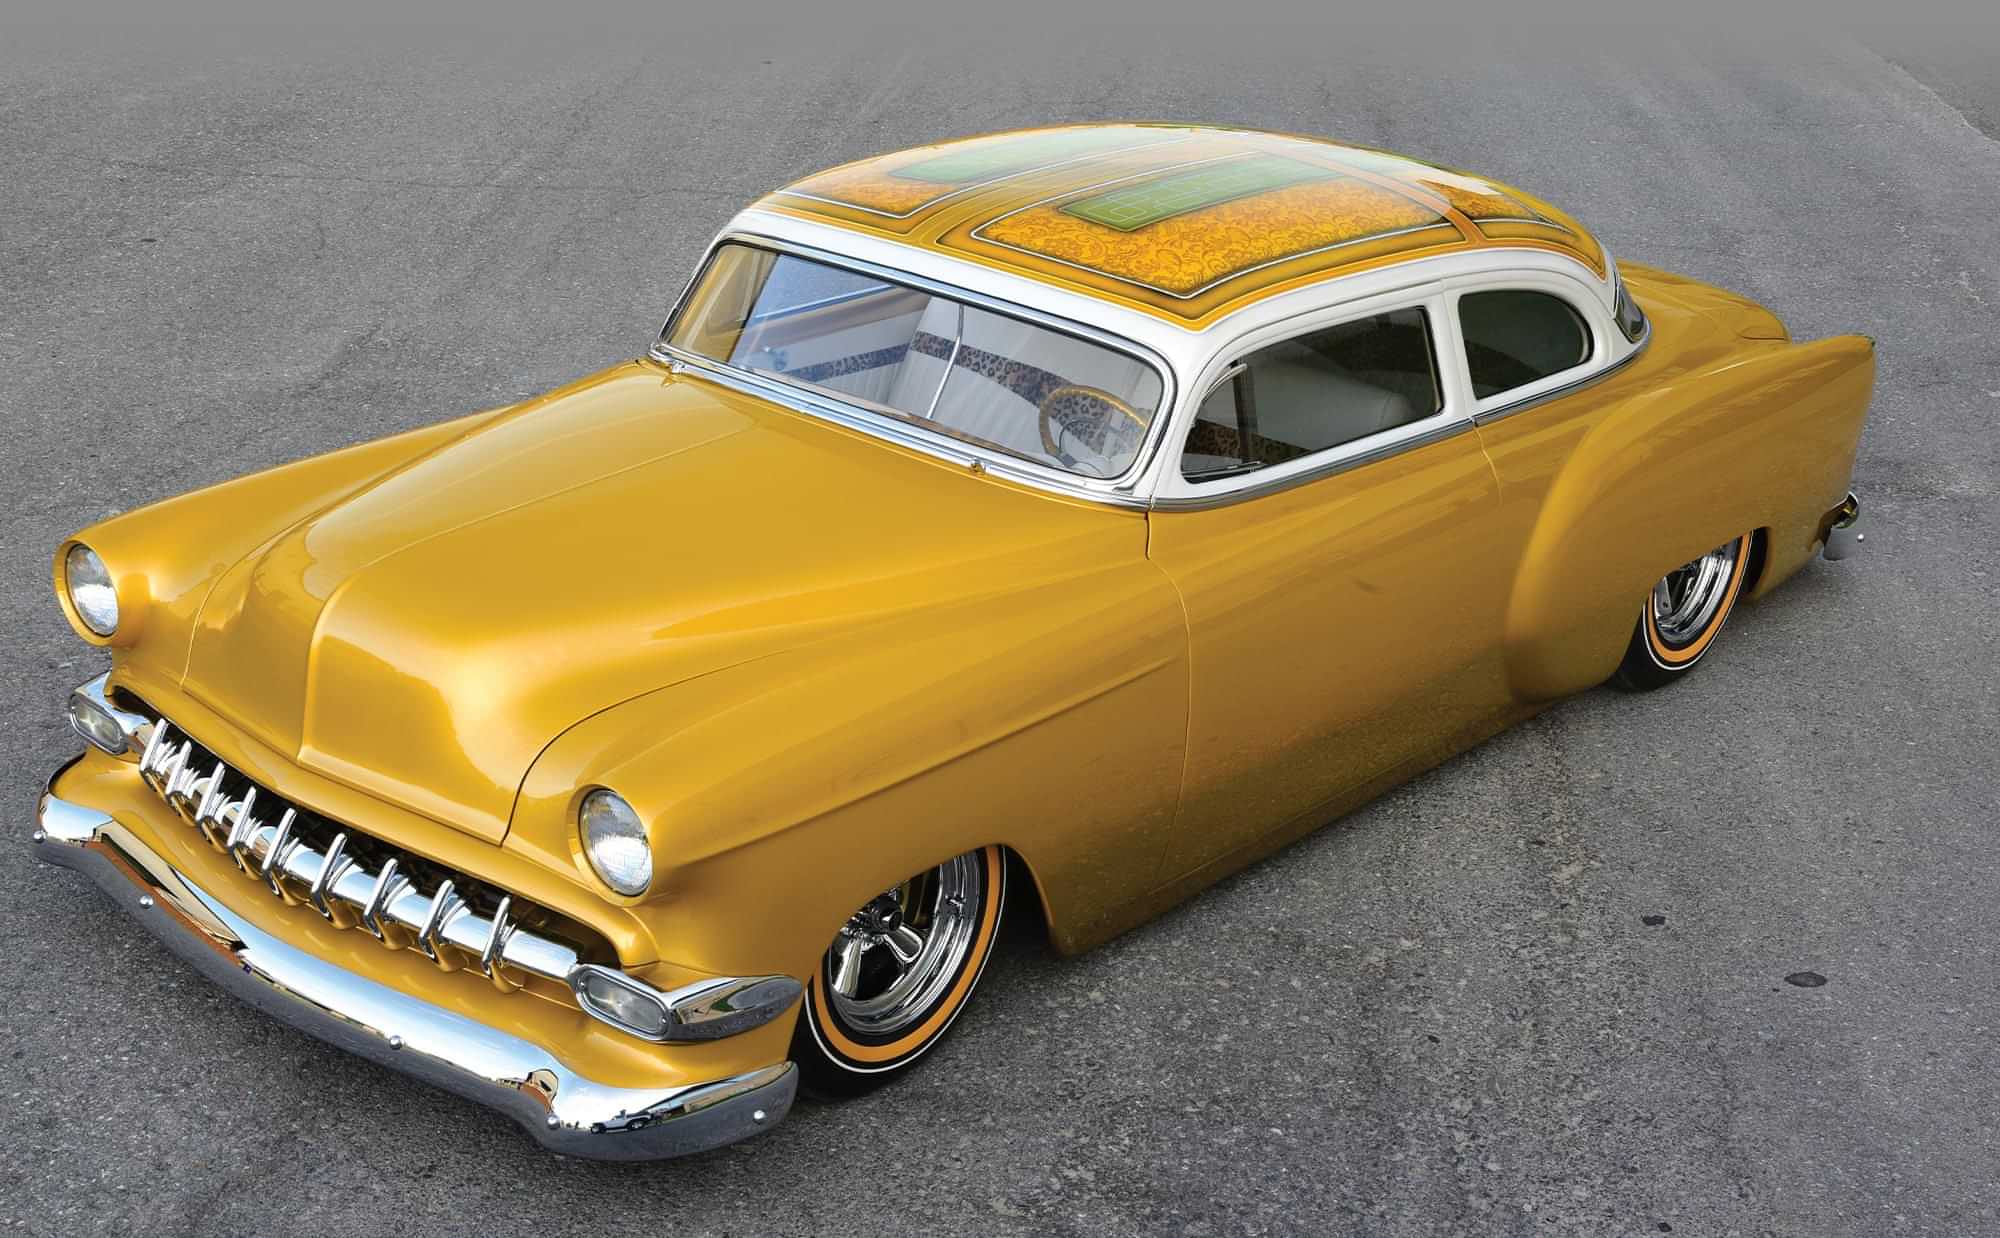 high angle 3/4ths driver side view of the John Hall Jr.'s gold custom ’54 Chevy Bel Air